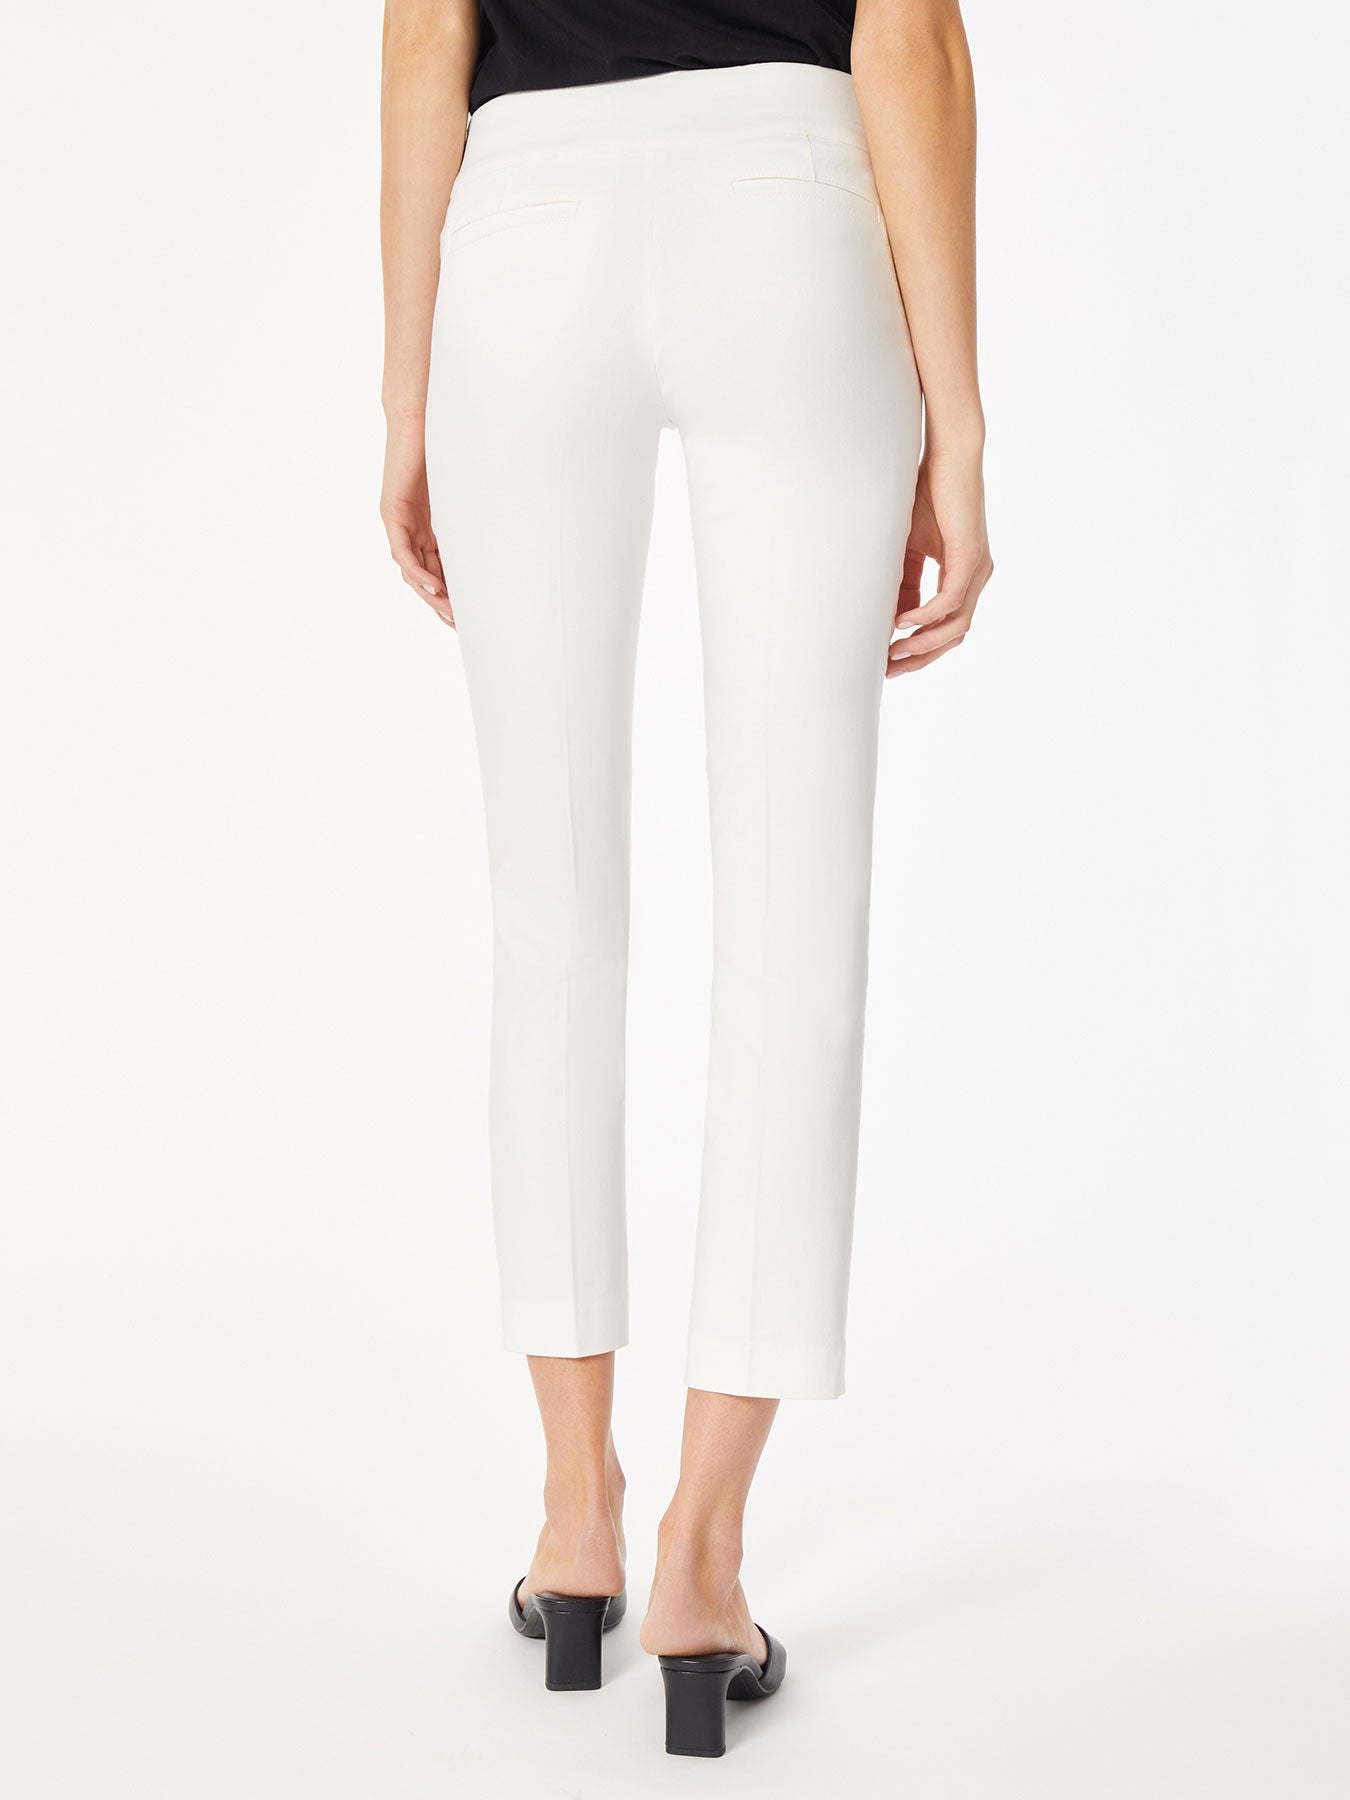 Wide High Ankle Jeans - White - Ladies | H&M IN